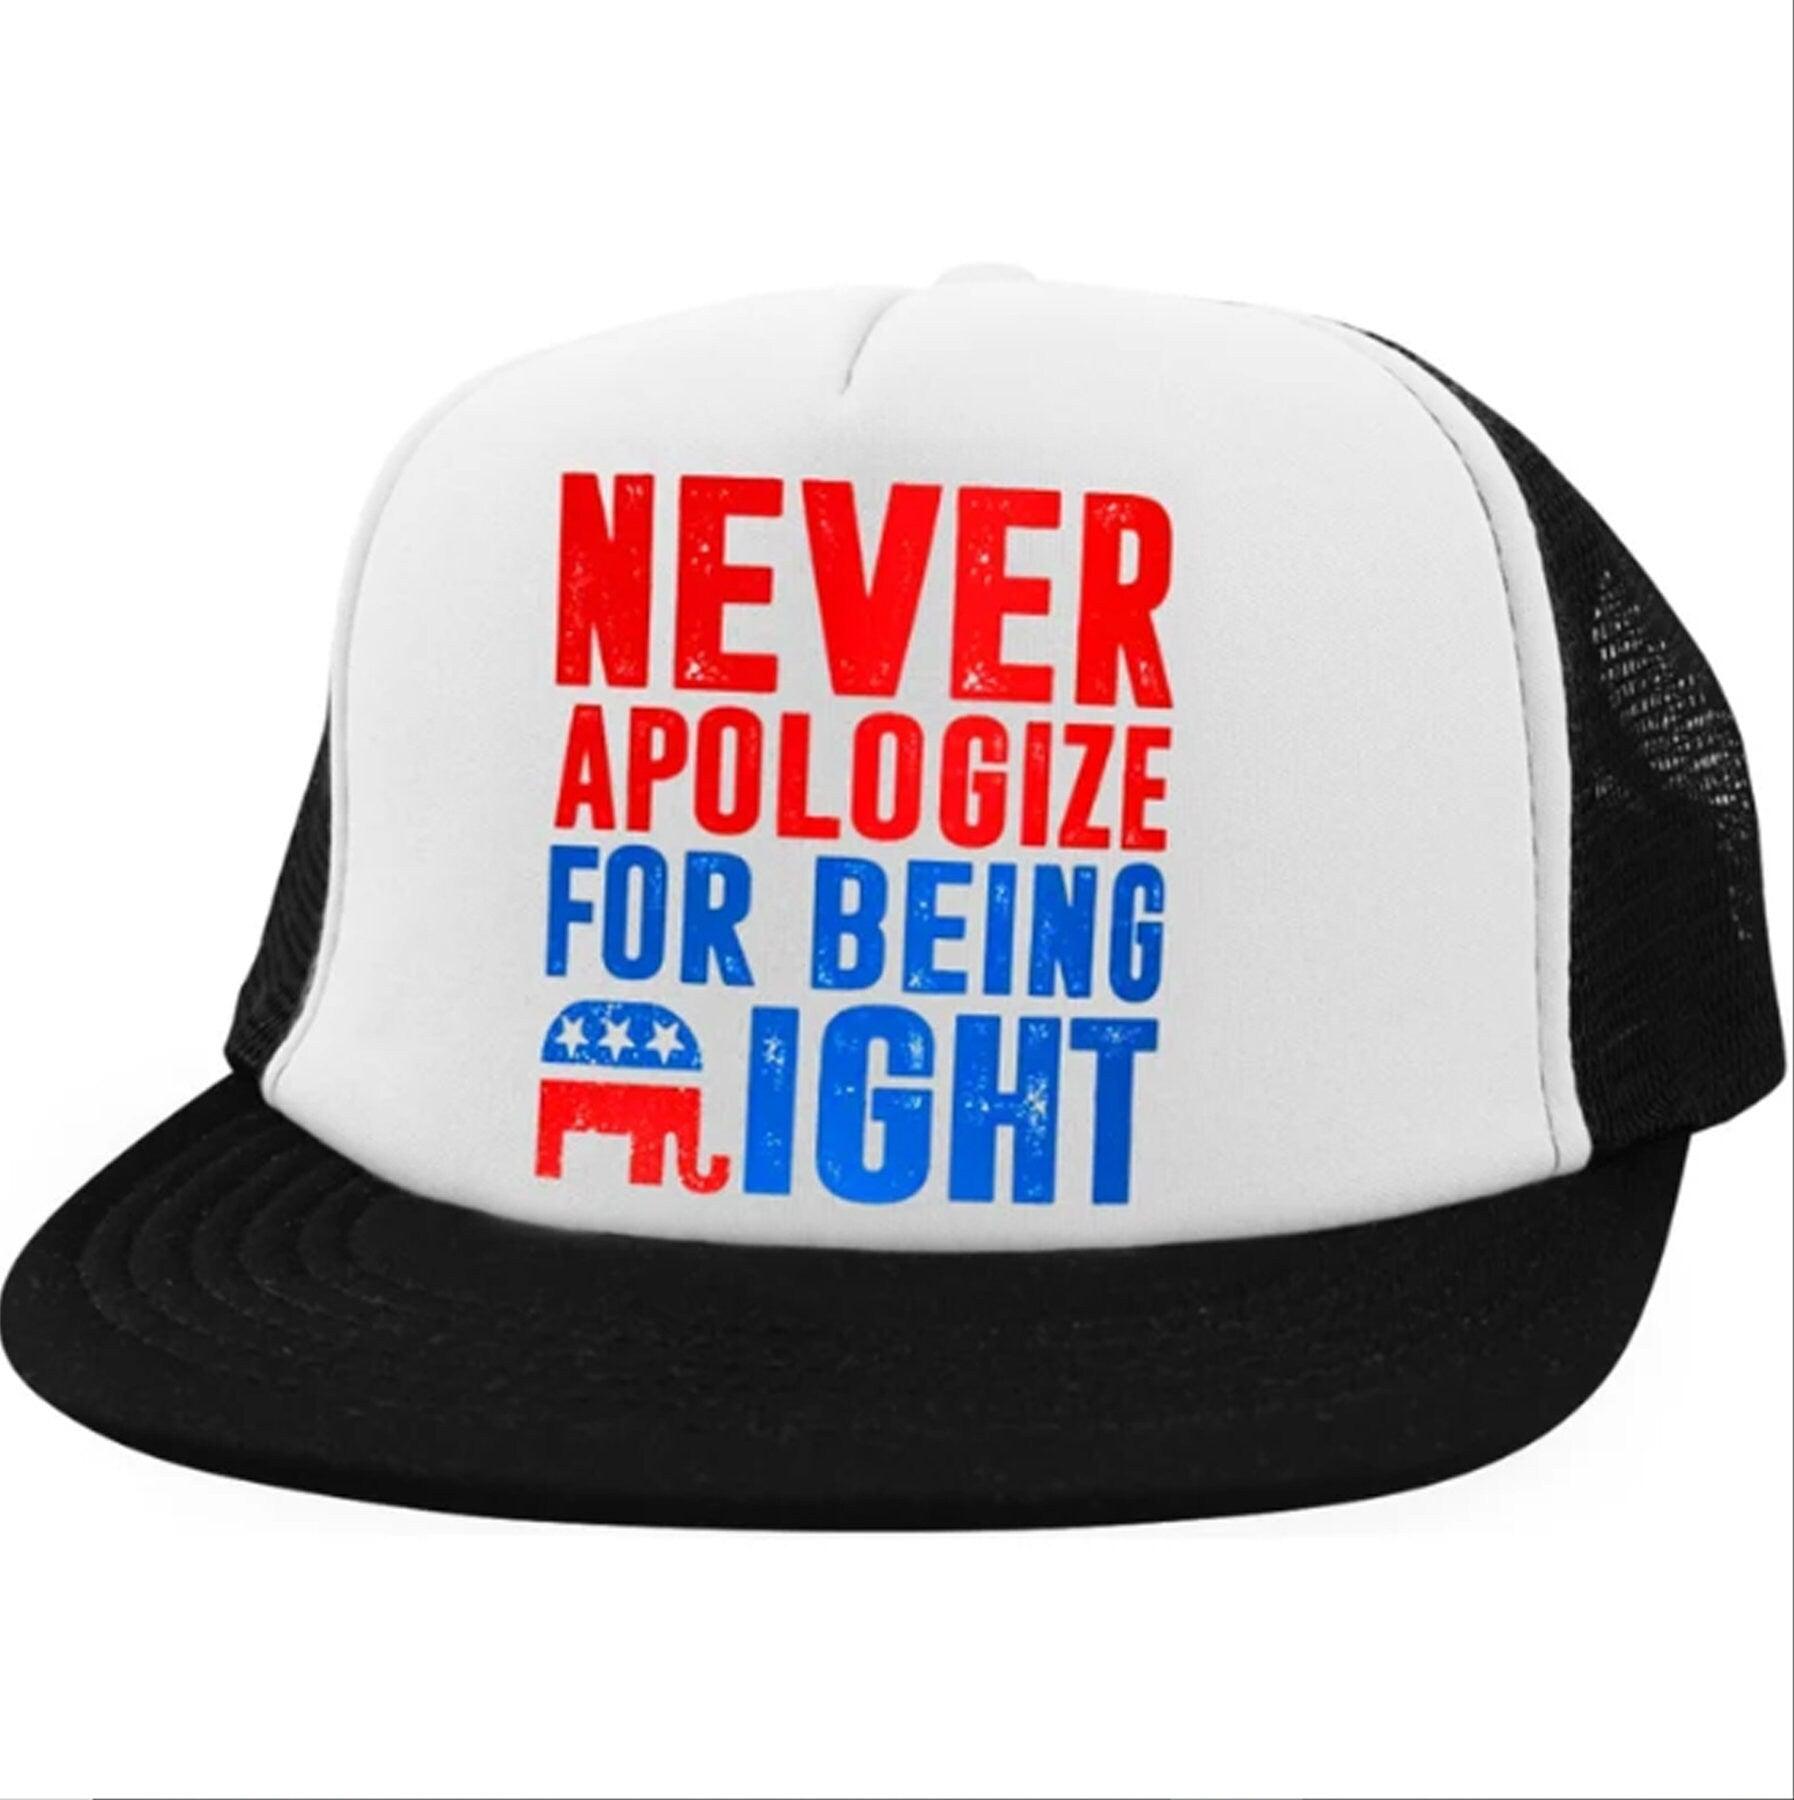 Never Apologize for being right Trucker Hat with Snapback - plusminusco.com